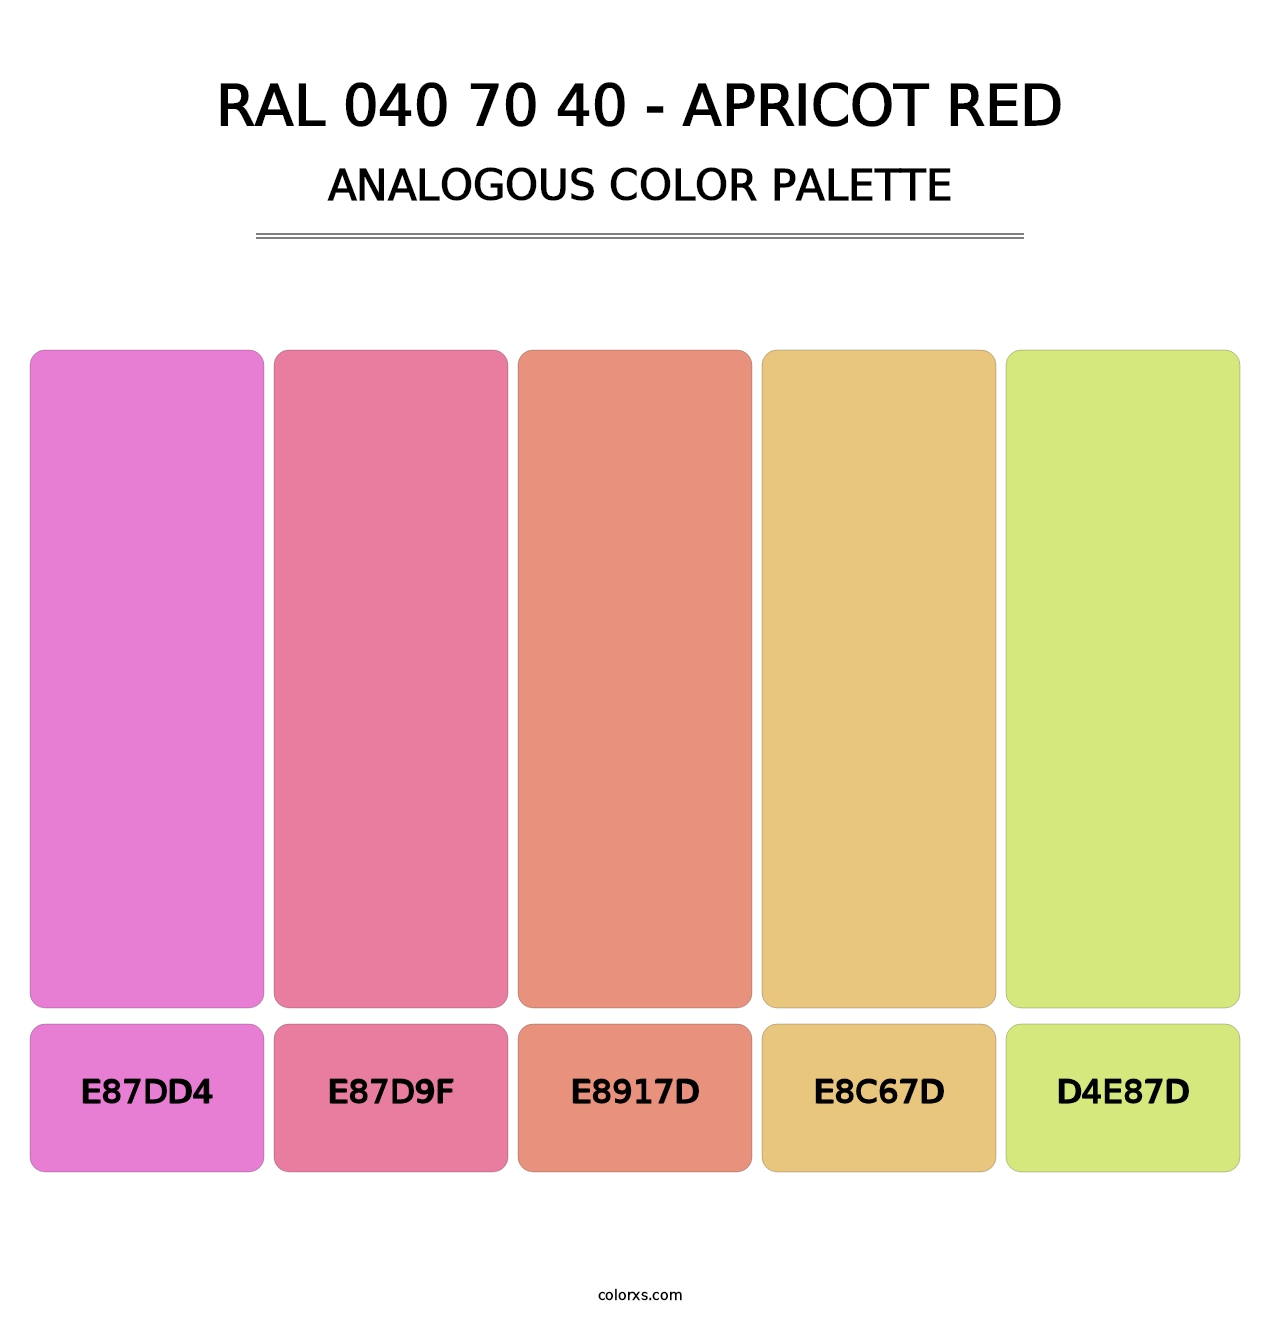 RAL 040 70 40 - Apricot Red - Analogous Color Palette